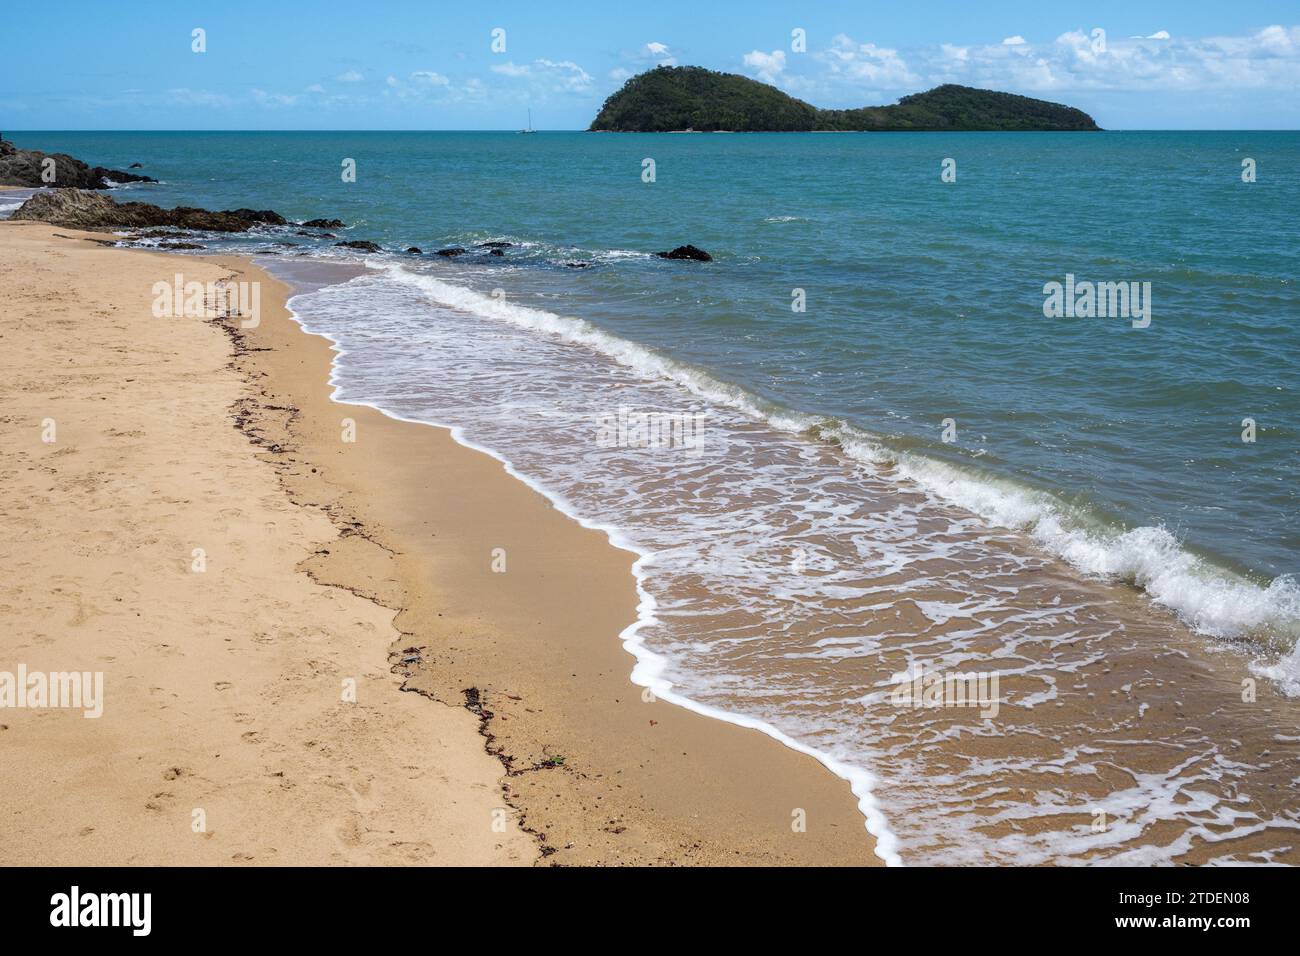 Double Island from the beach at Palm Cove, Queensland, Australia Stock Photo